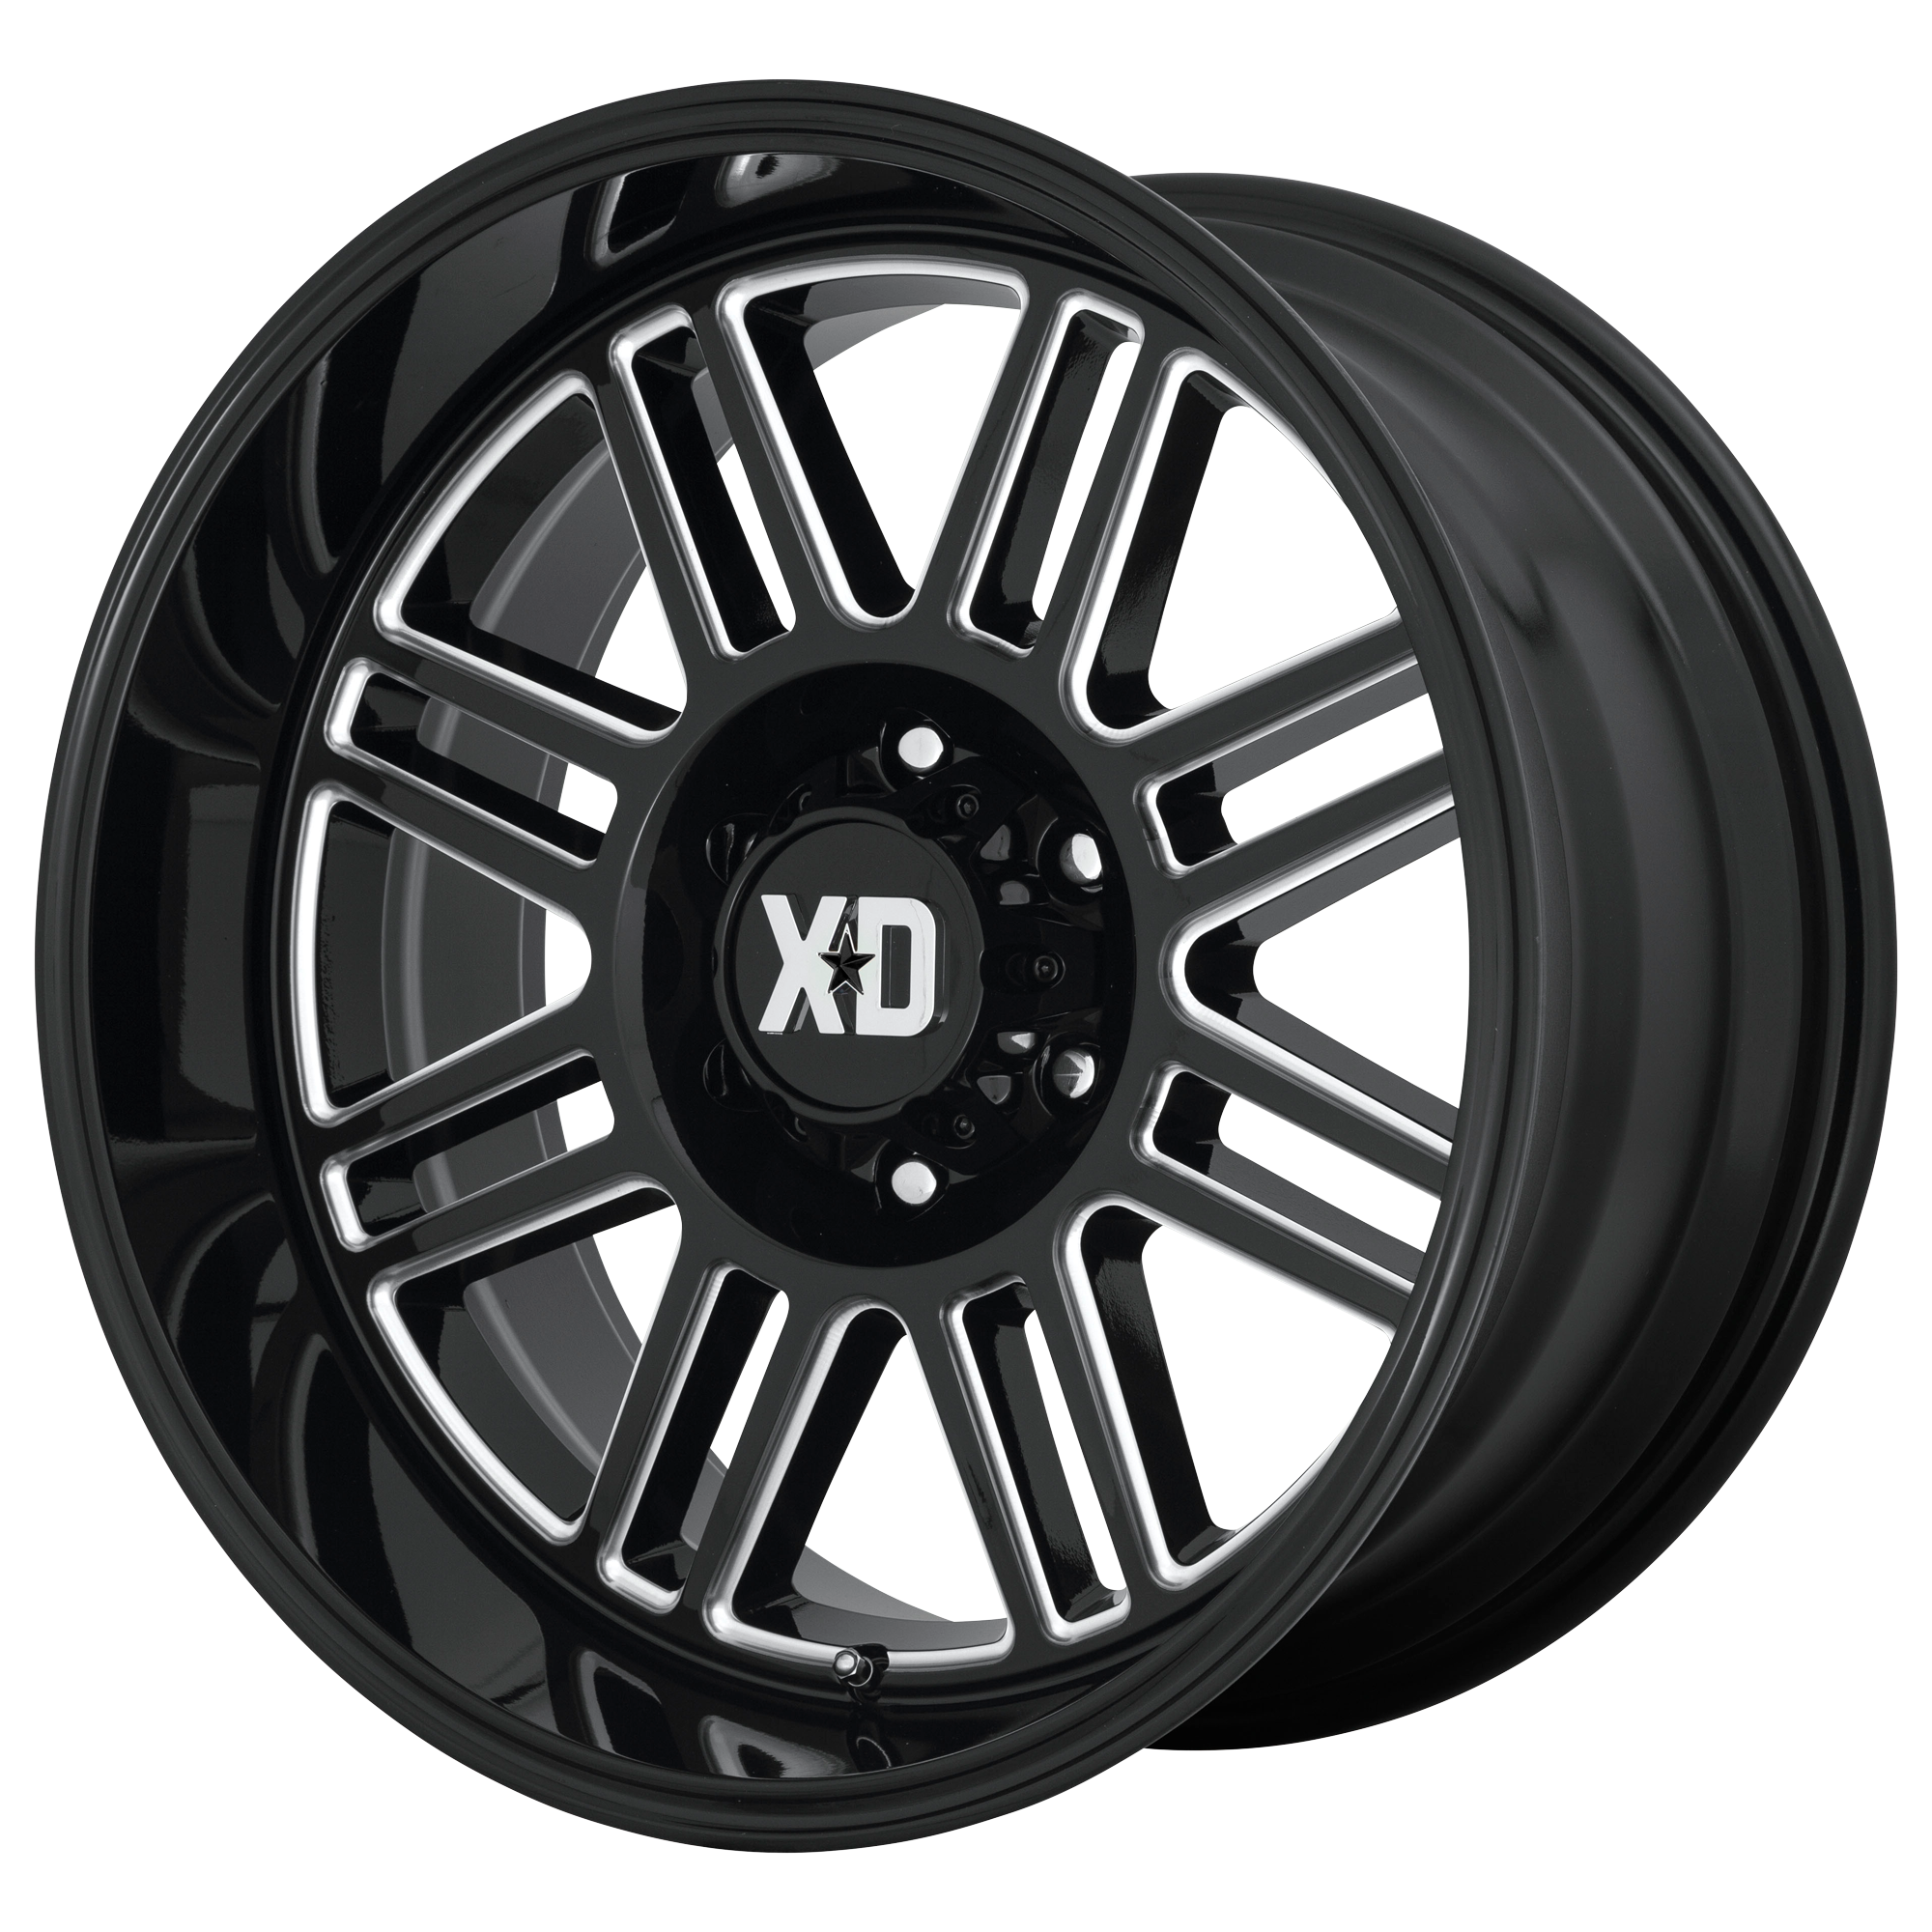 CAGE 20x9 5x150.00 GLOSS BLACK MILLED (18 mm) - Tires and Engine Performance